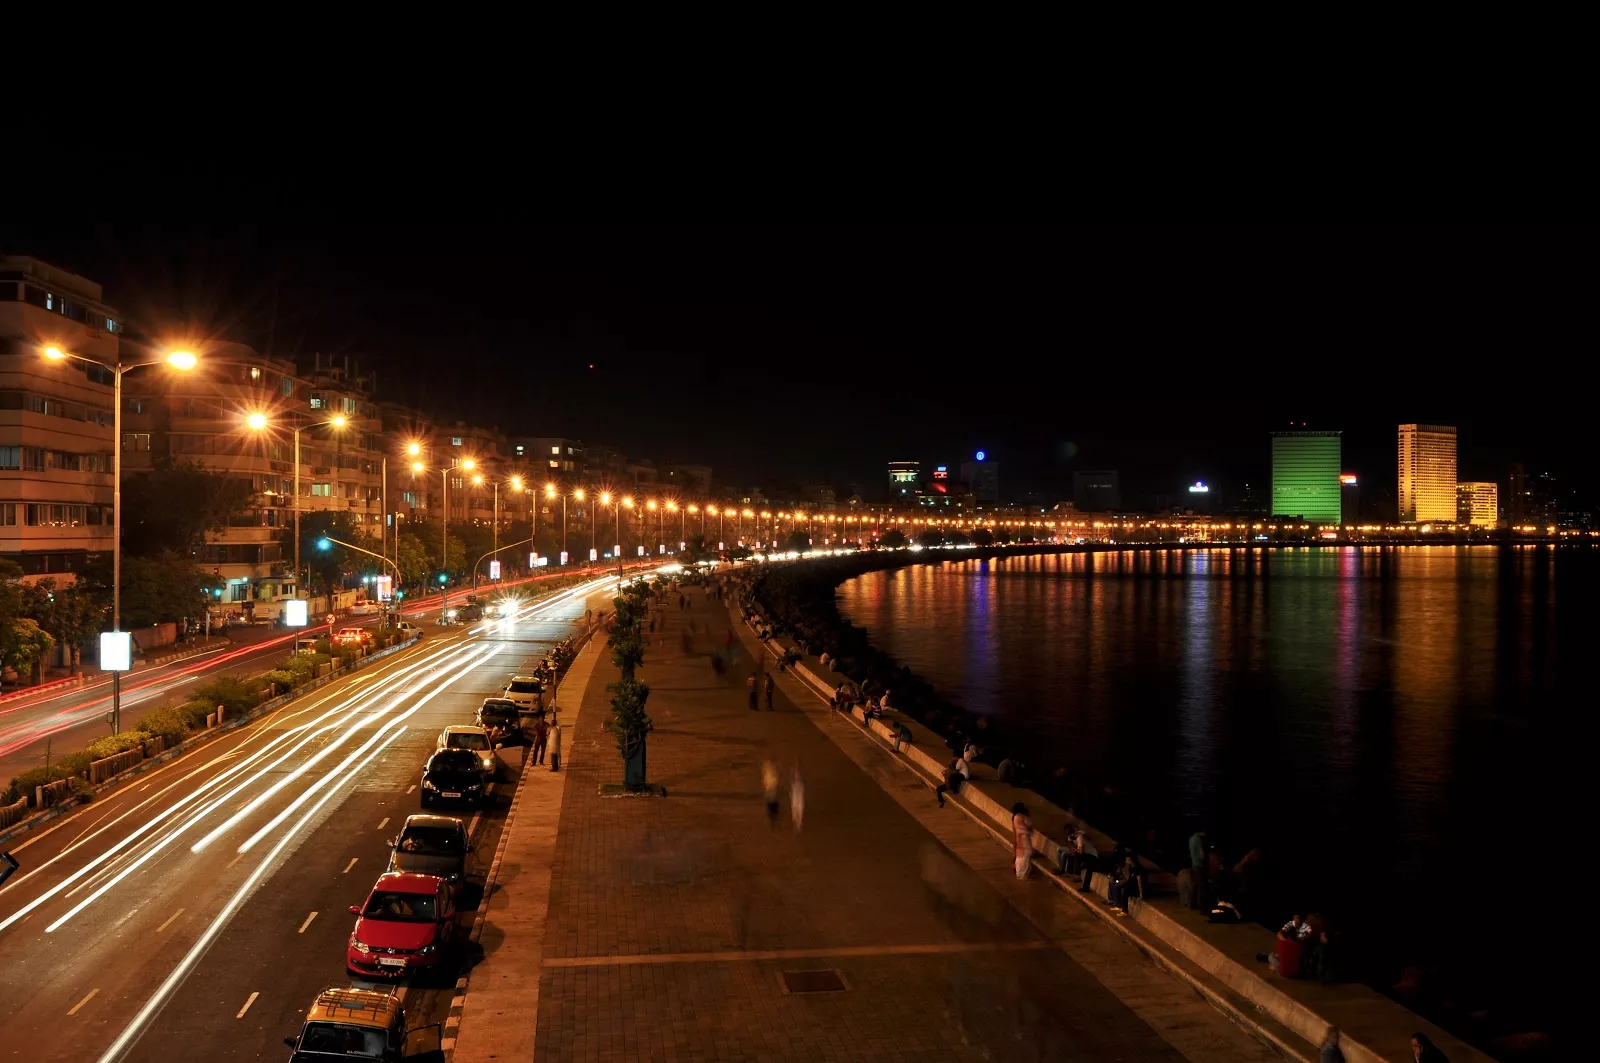 Queen's Necklace - Marine Drive in India, Central Asia | Architecture - Rated 4.4